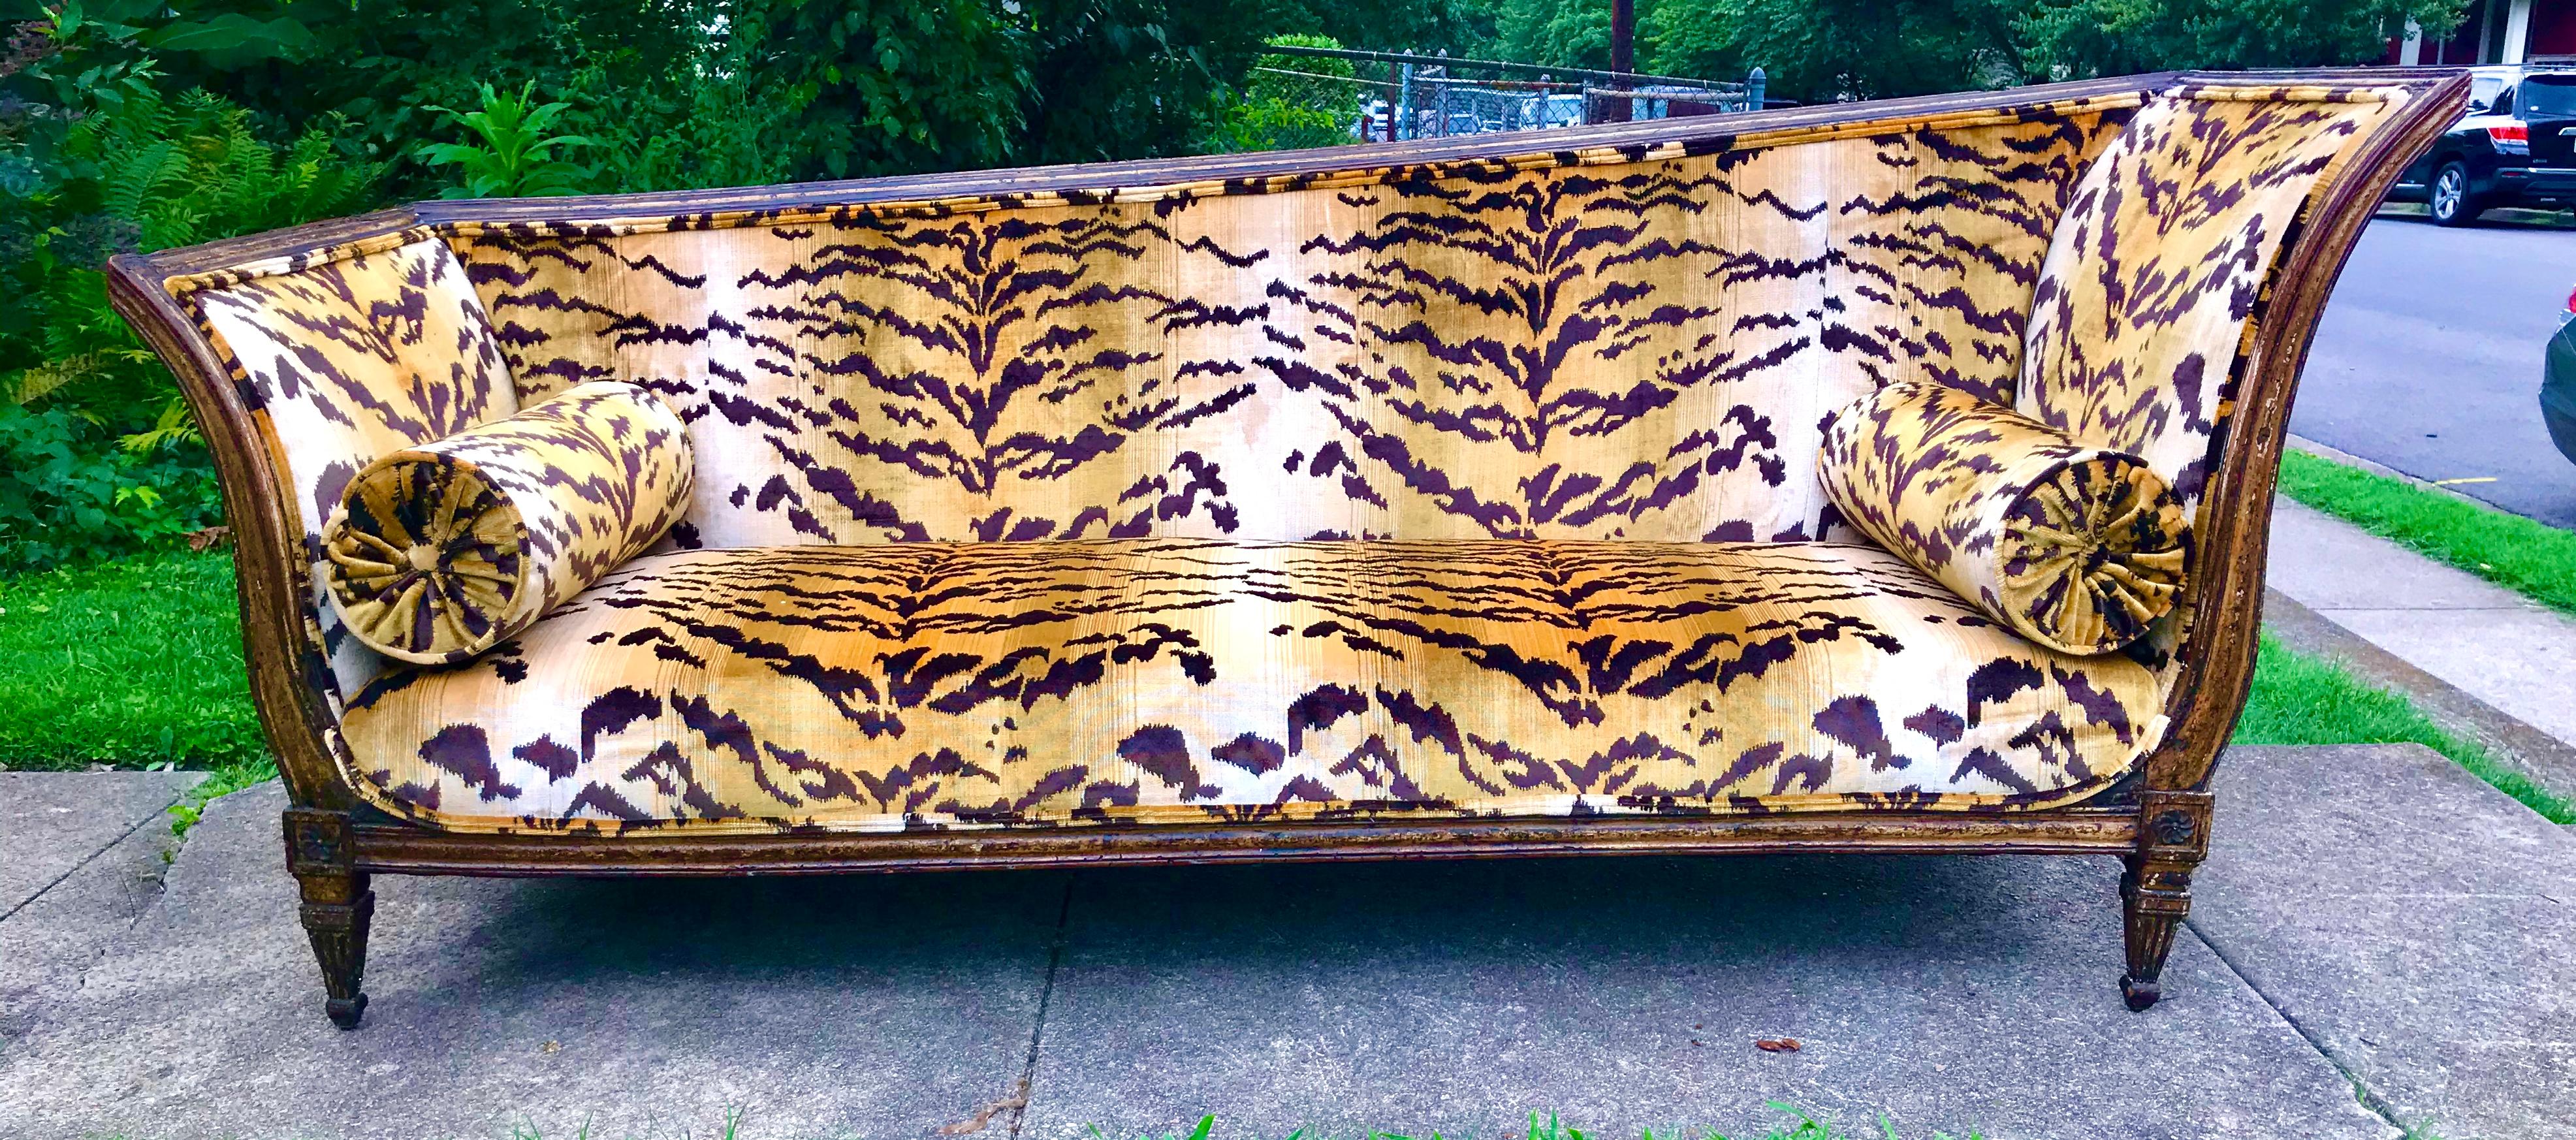 Large Italian Neoclassical Giltwood Récamier Settee in Scalamandré Tiger Velvet For Sale 8